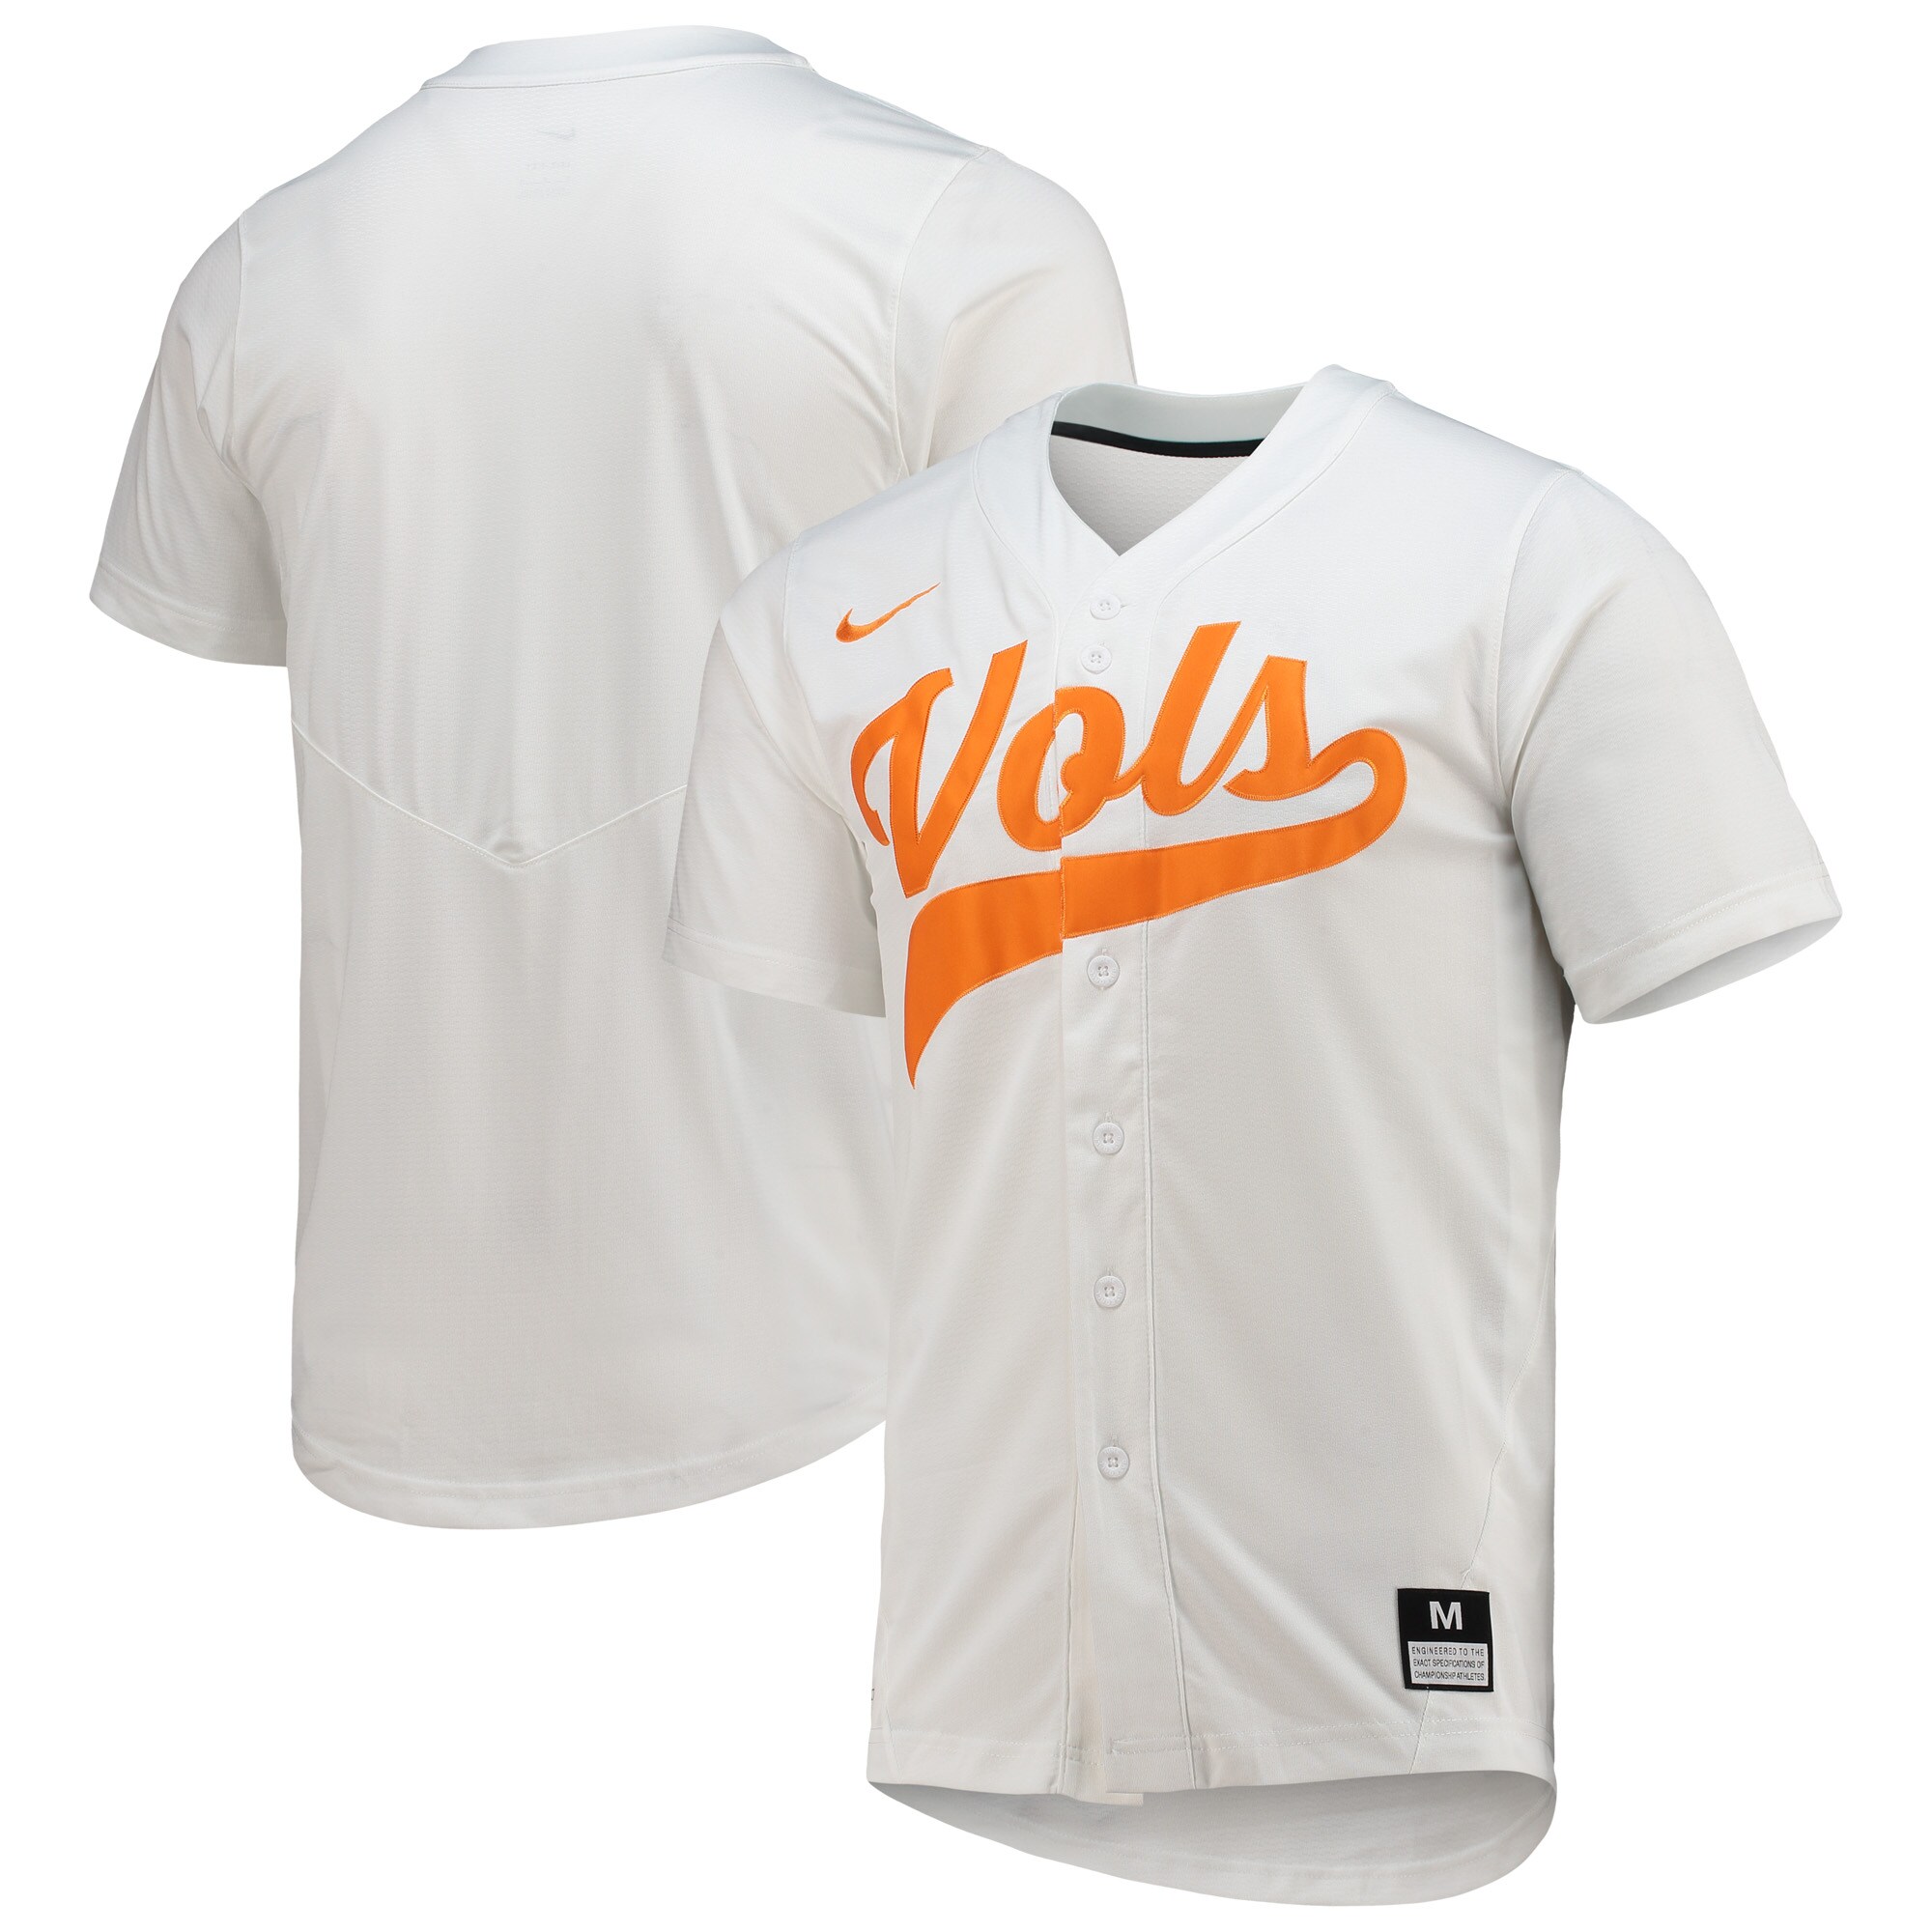 Tennessee Volunteers Replica Baseball Jersey - White For Youth Women Men